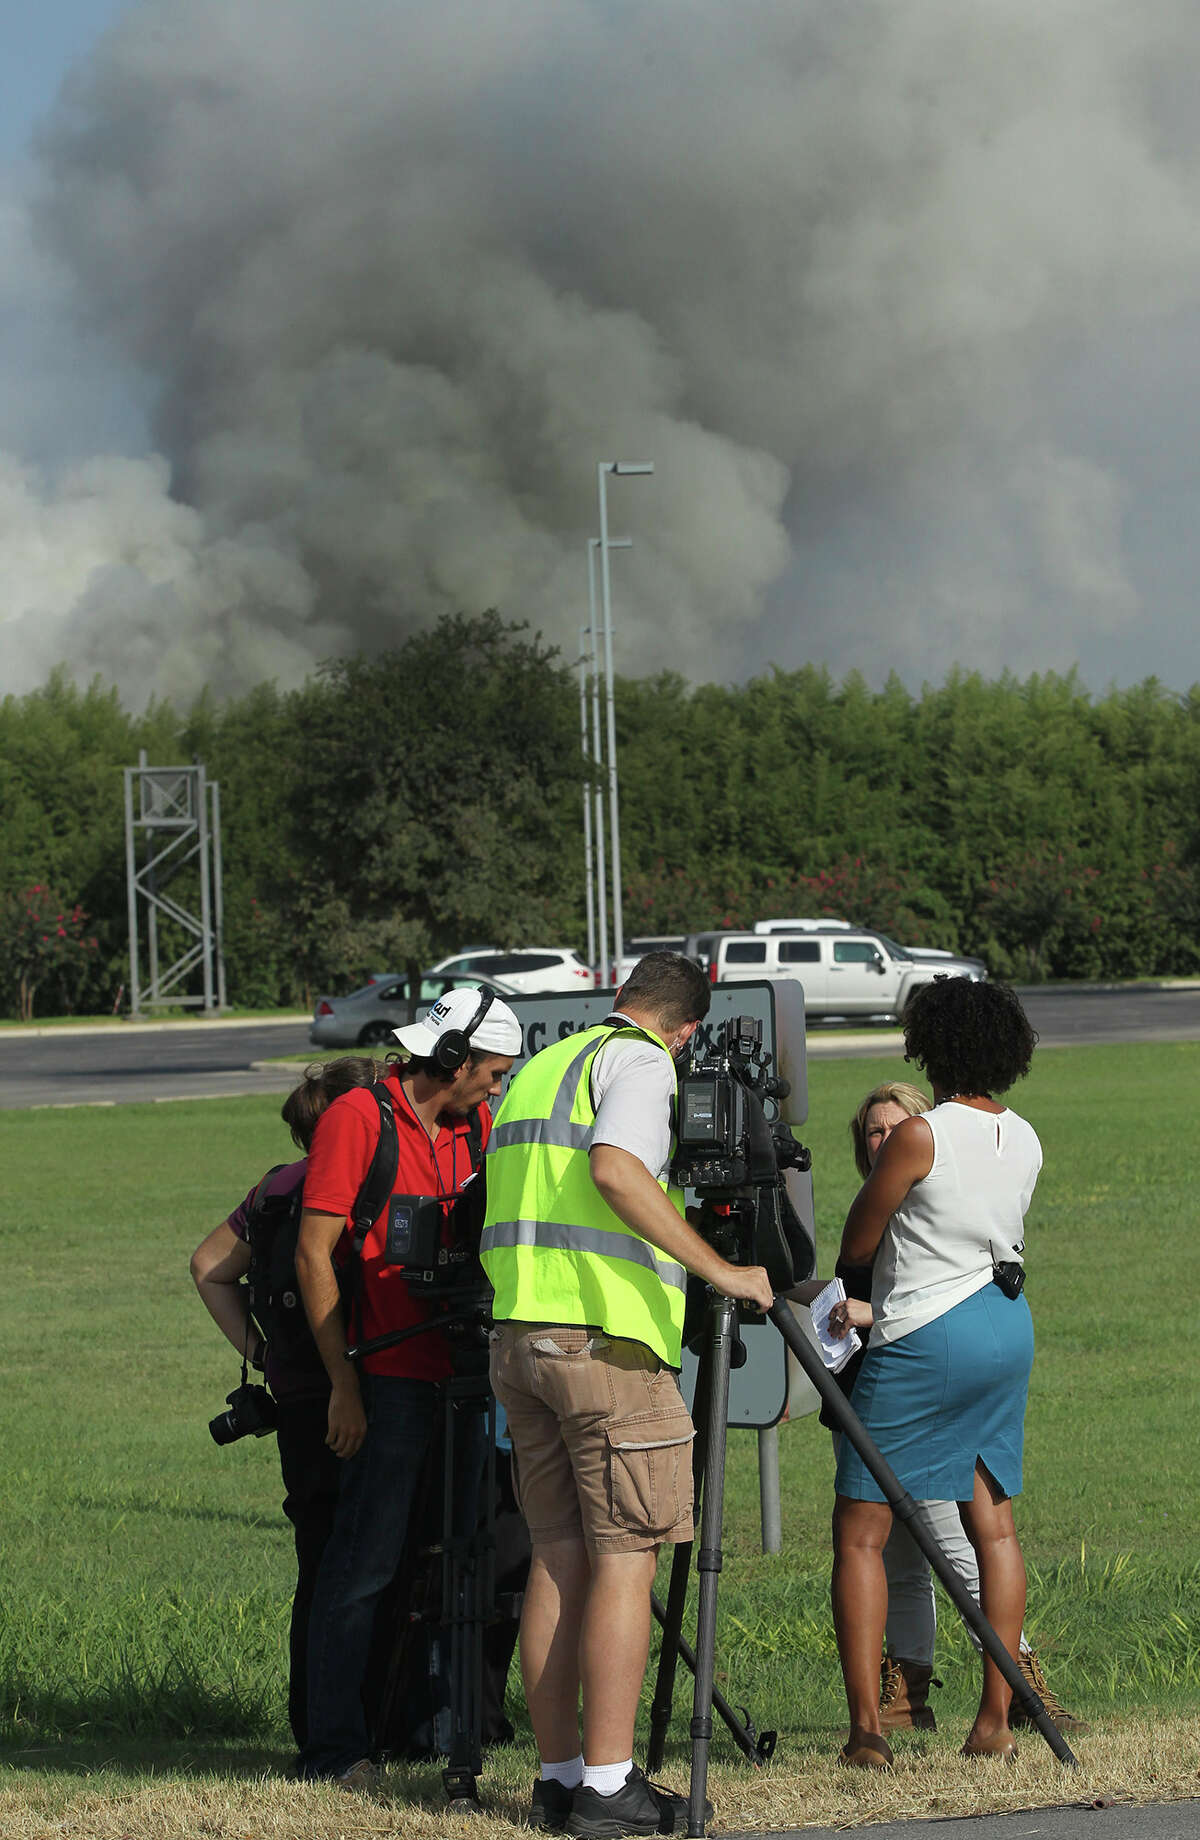 A large plume of smoke ascends skyward Wednesday July 29, 2015 from the CMC Steel Texas plant near Seguin, Texas after a fire started there about 5:30 a.m.. According to City of Seguin Public Information Officer Morgan Ash, the source of the fire may have been an automobile. Ash said 15 local fire departments are working to extinguish the fire at the scrap metal recycling plant and there have been no injuries or evacuations associated with the fire.